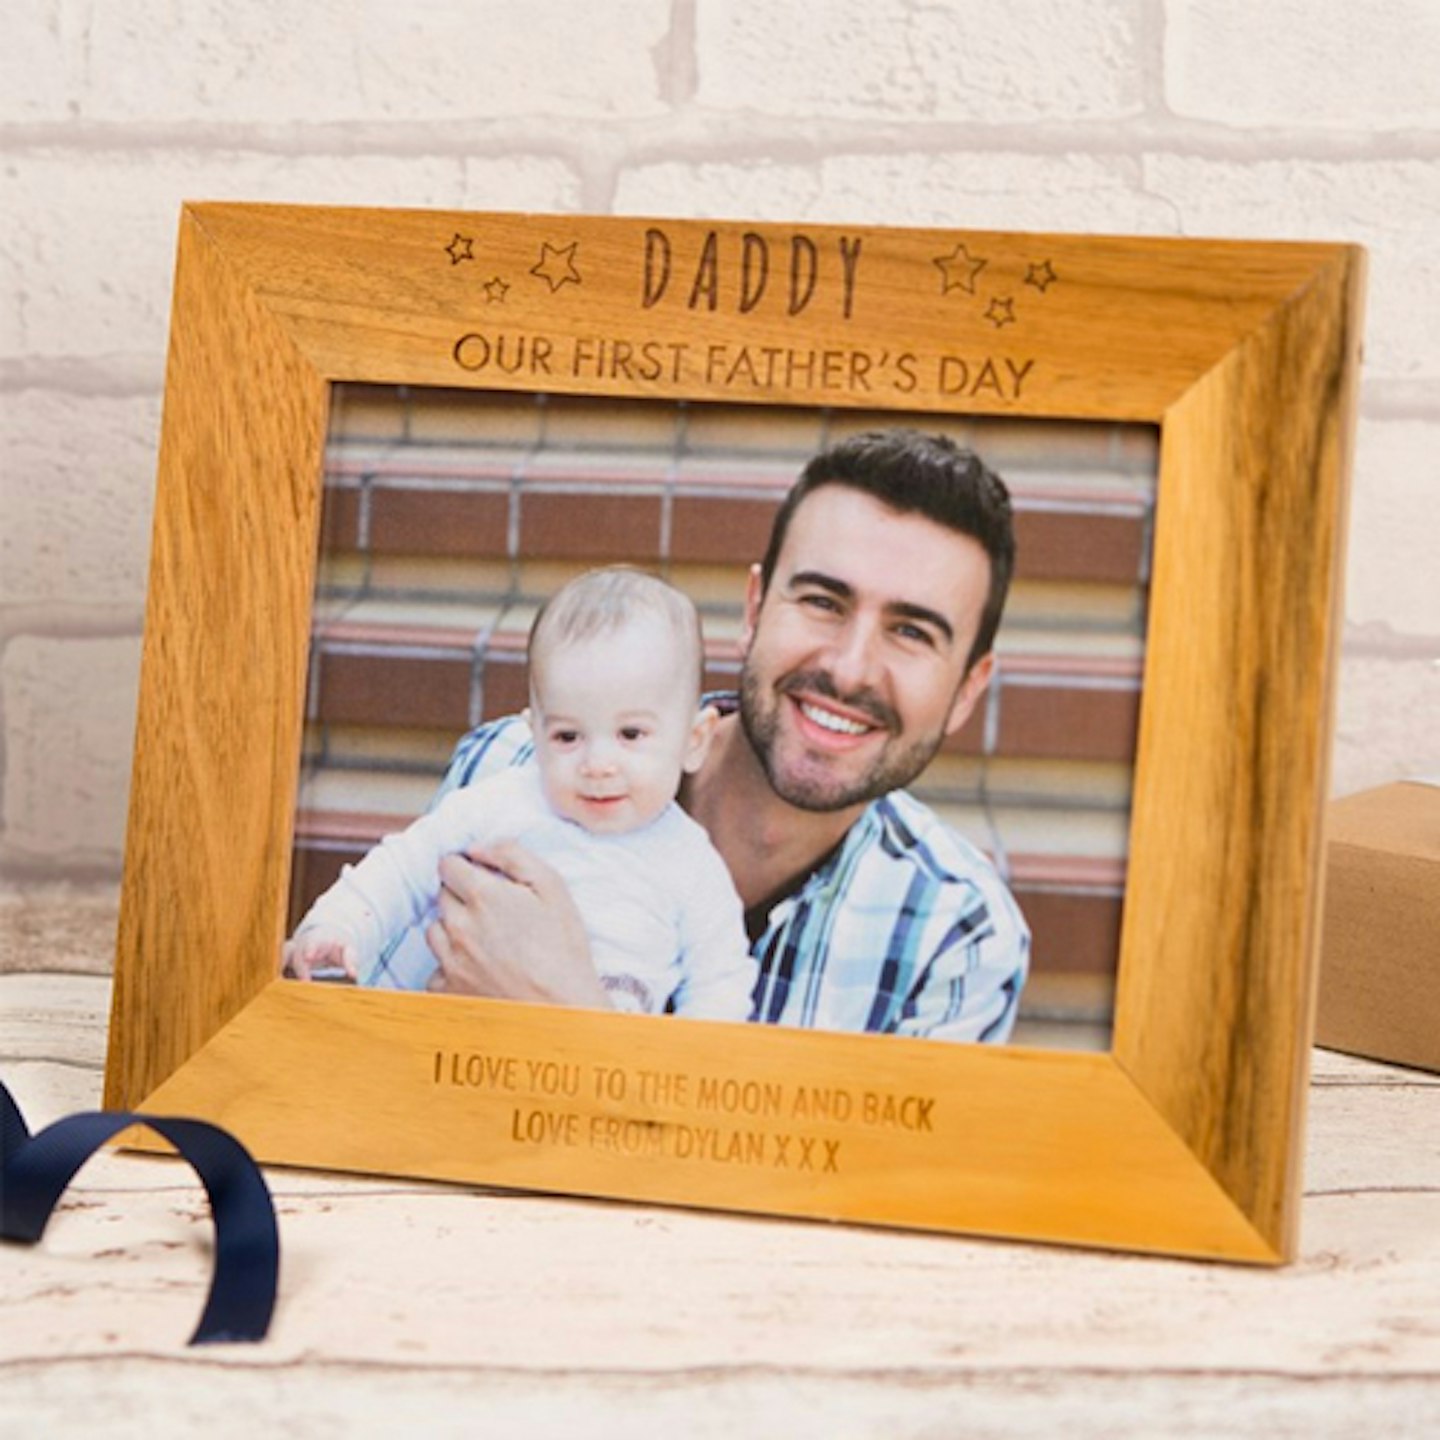 First Father's Day Gifts: Engraved Wooden Picture Frame - Our First Father's Day